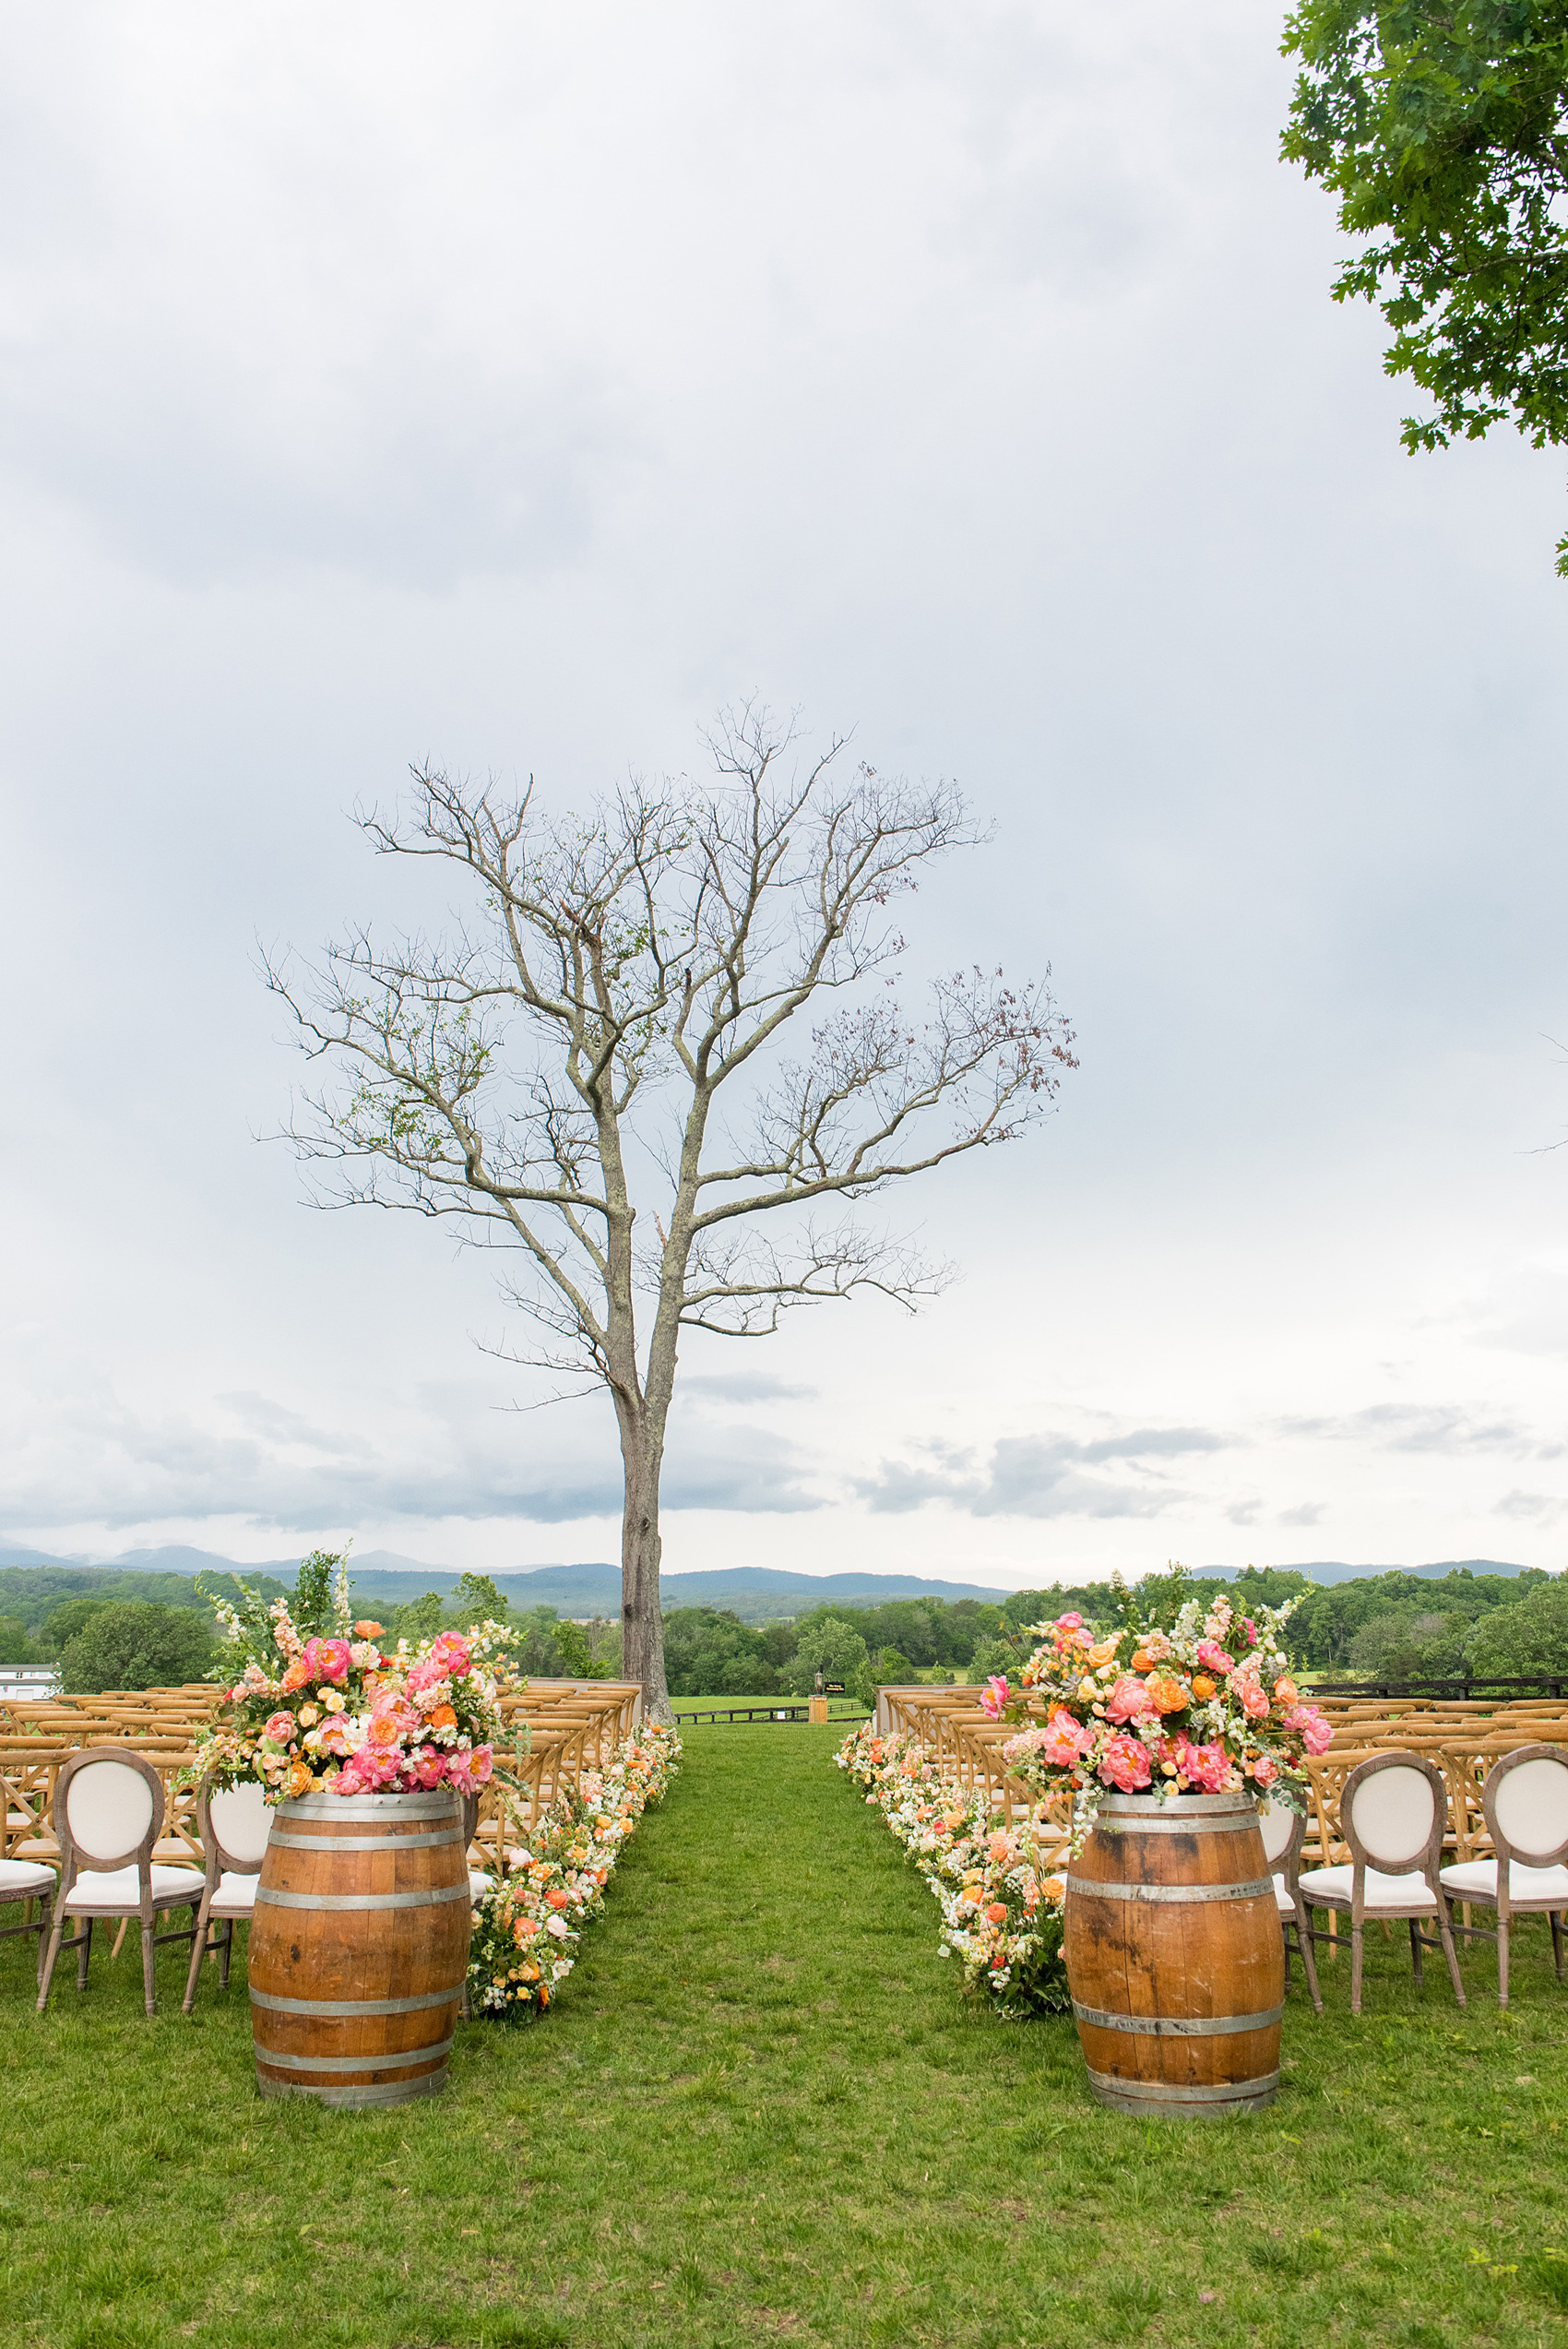 Charlottesville wedding photos by Mikkel Paige Photography at the Lodge at Mount Ida Farm. This Virginia venue is perfect for brides and grooms looking for a beautiful farm reception space. It’s green, romantic, and easy to dress up with flowers or keep simple! The ceremony was held outdoors on the hill, overlooking the Blue Ridge Mountains. Click through for the complete post from this May event, especially details of the flower-lined aisle! Planning and design by @vivalevent and flowers by @apassarelli of Meristem Floral. #Charlottesville #mountidafarm #lodgeatmountida #CharlottesvilleVA #CharlottesvilleVirginia #Charlottesvillewedding #Charlottesvilleweddingphotographer #mikkelpaige #MeristemFloral #VivaLEvent #outdoorceremony #blueridgemountains